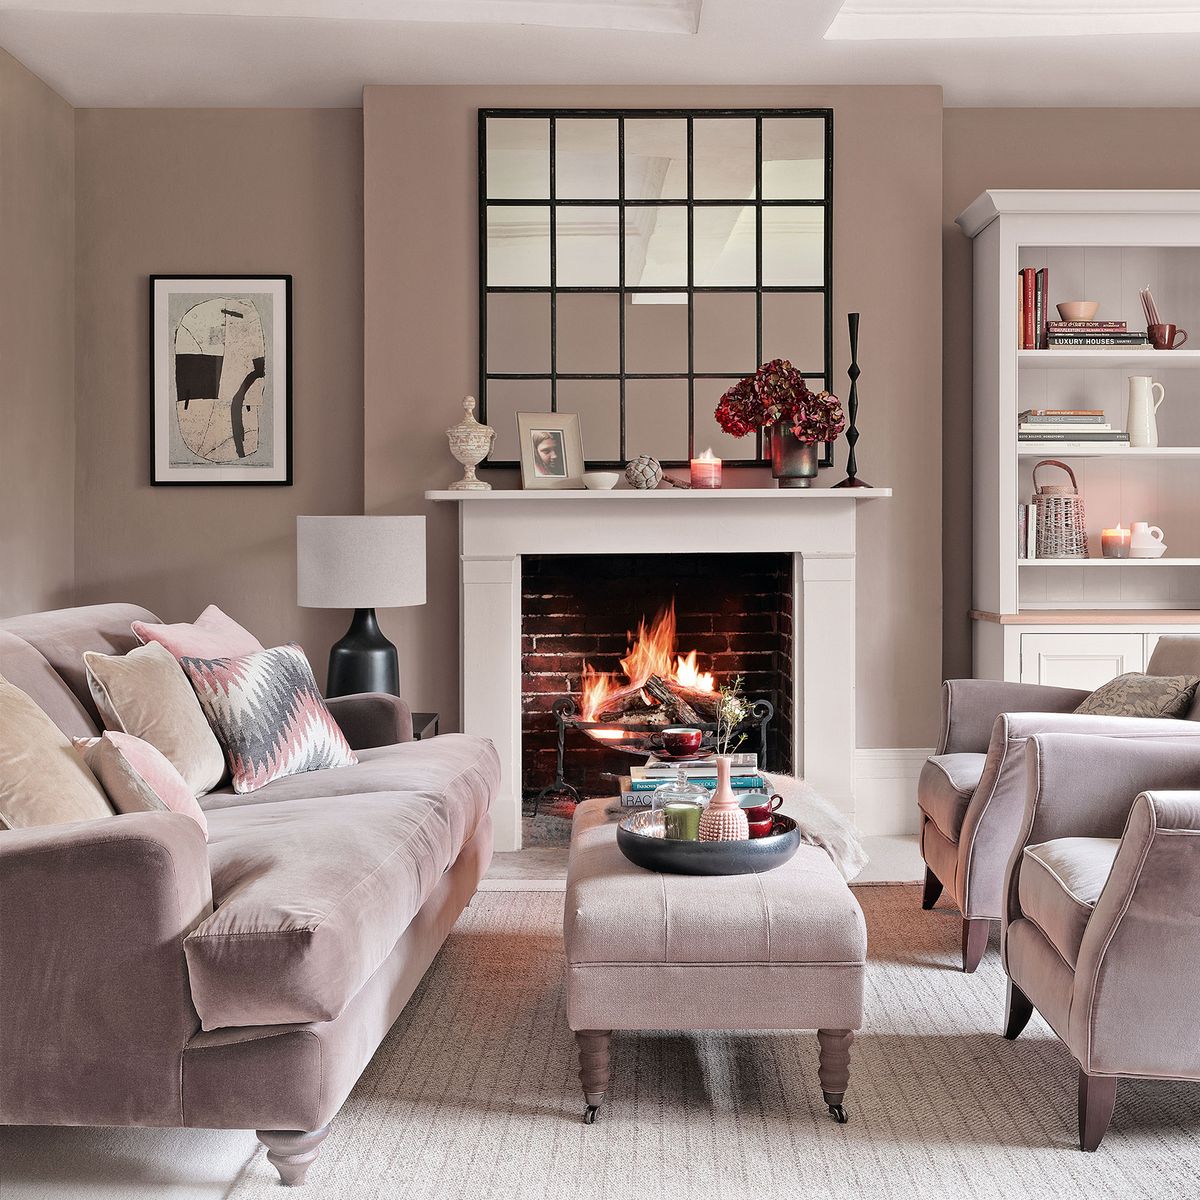 10 ideas for above fireplace decor – how to style up that free space on your wall